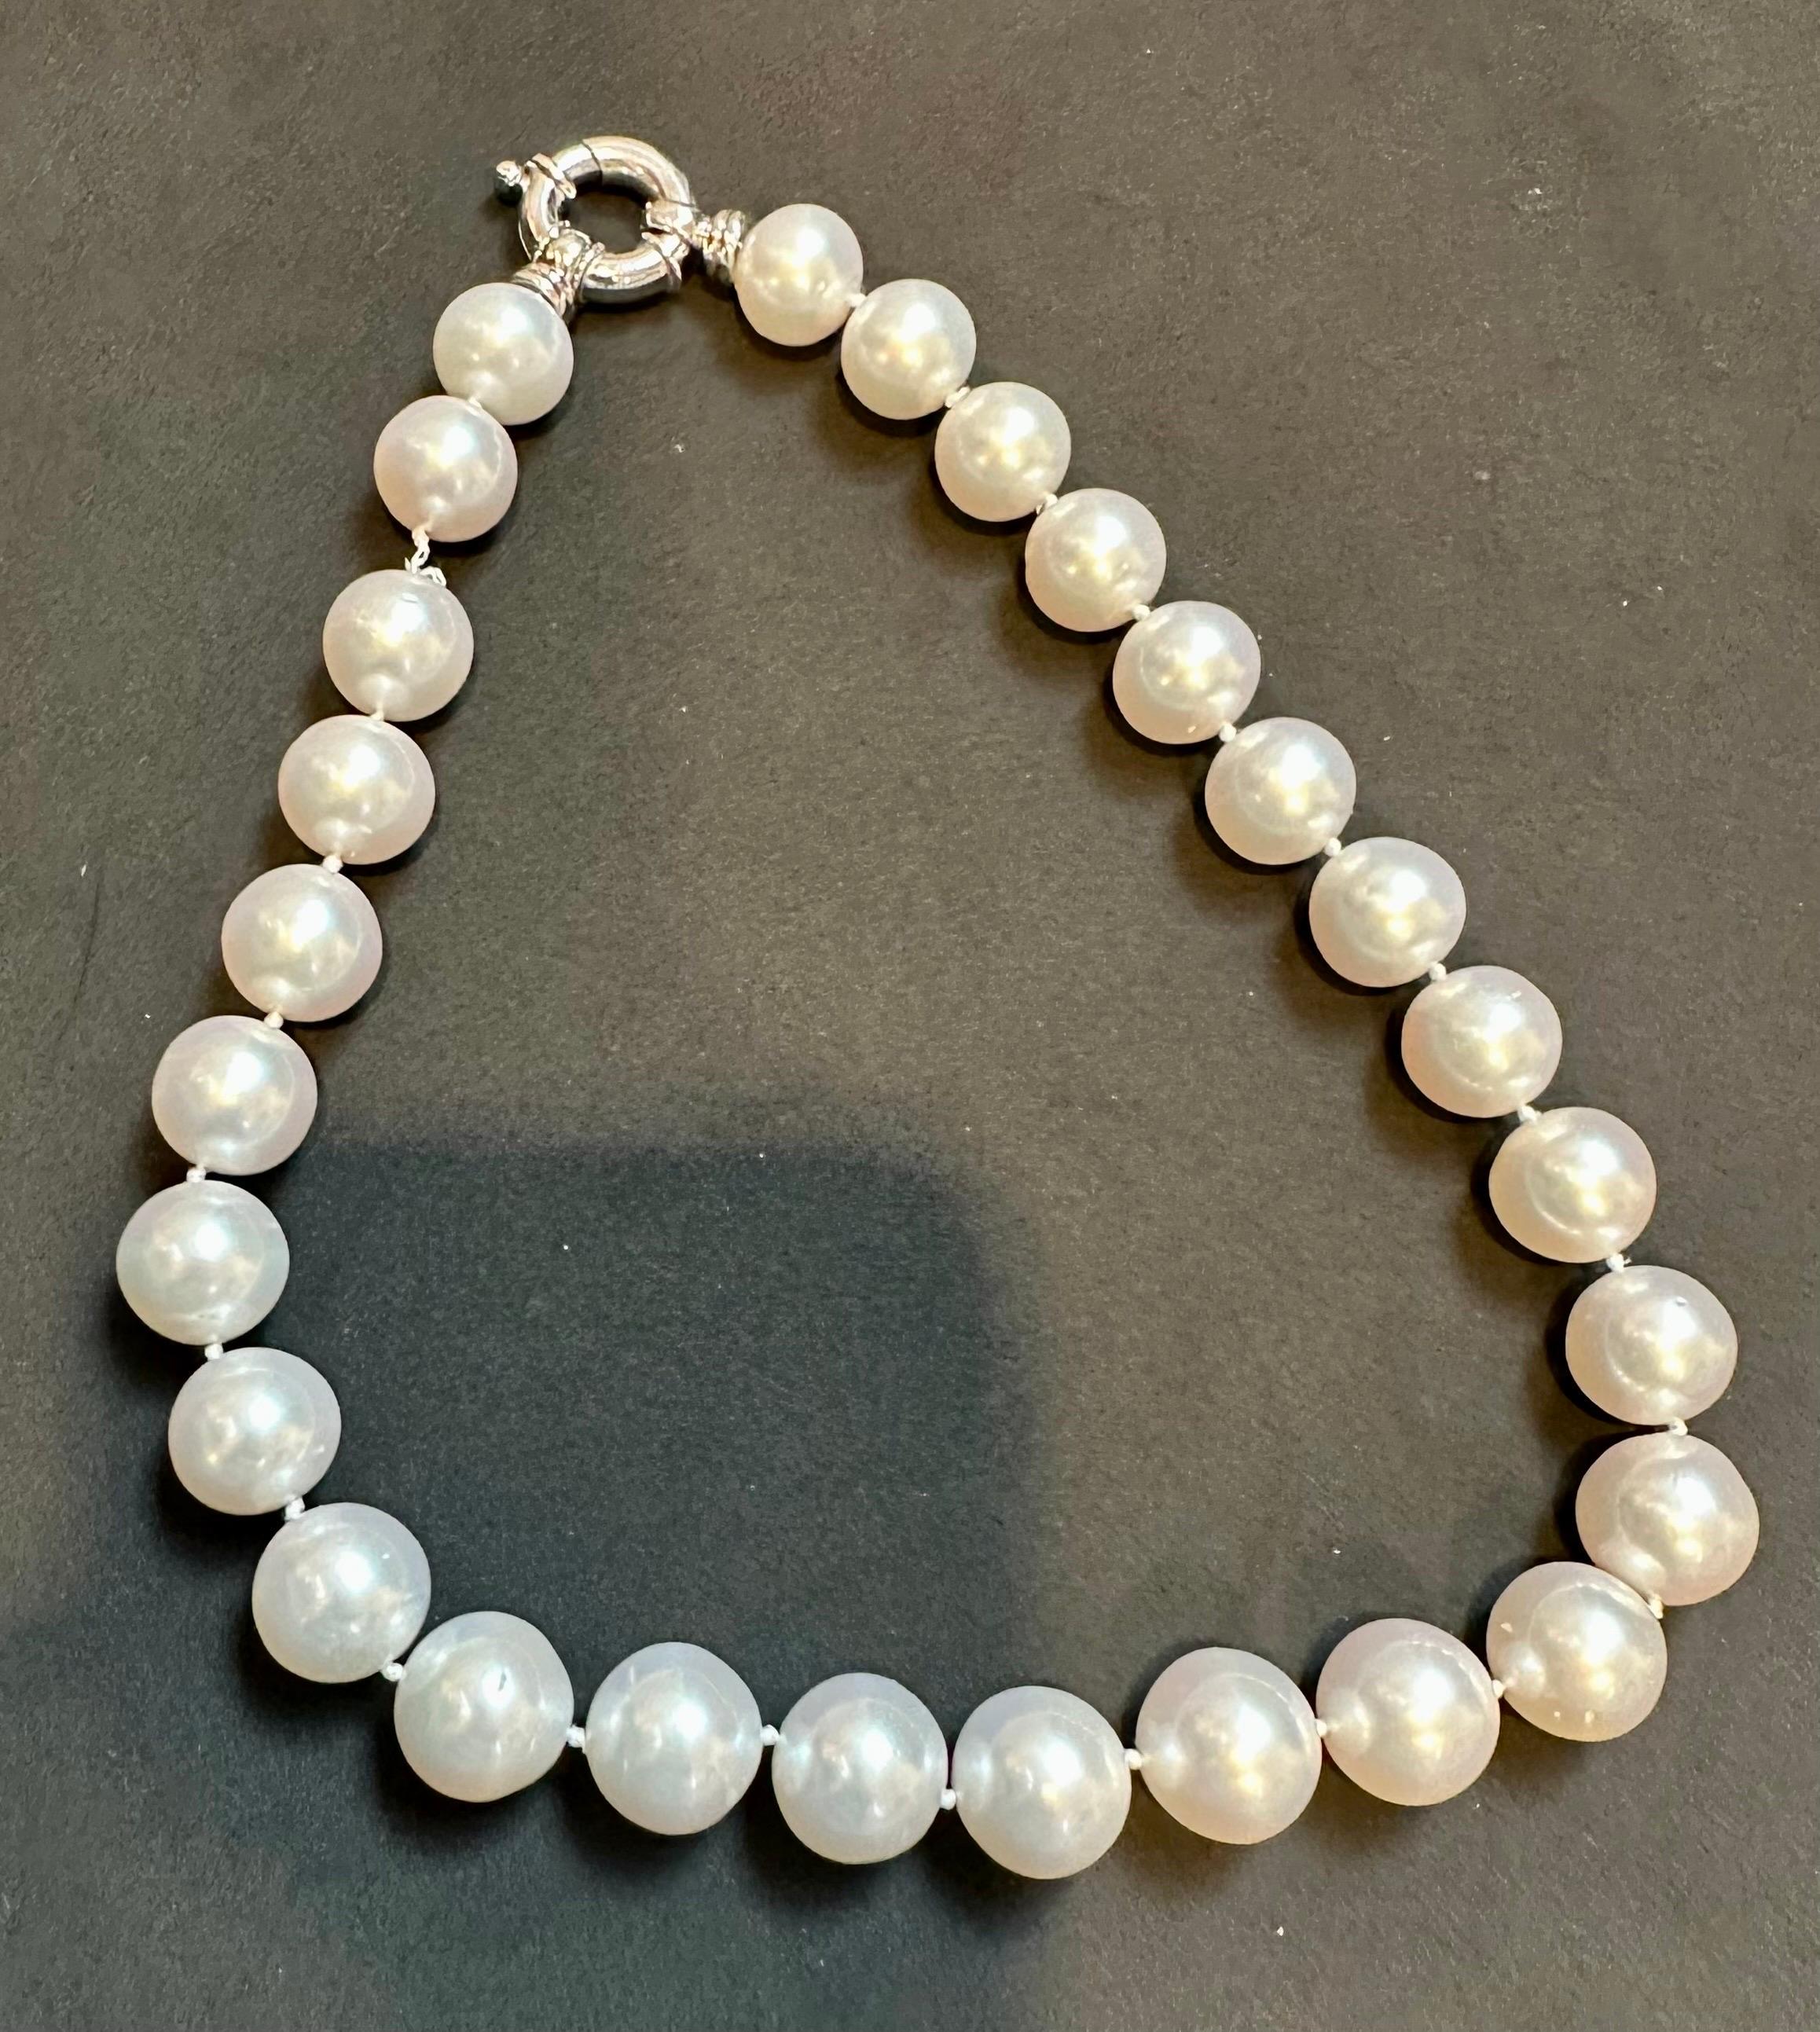 White South Sea Pearls Strand Necklace 18 Karat  White Gold Clasp 7